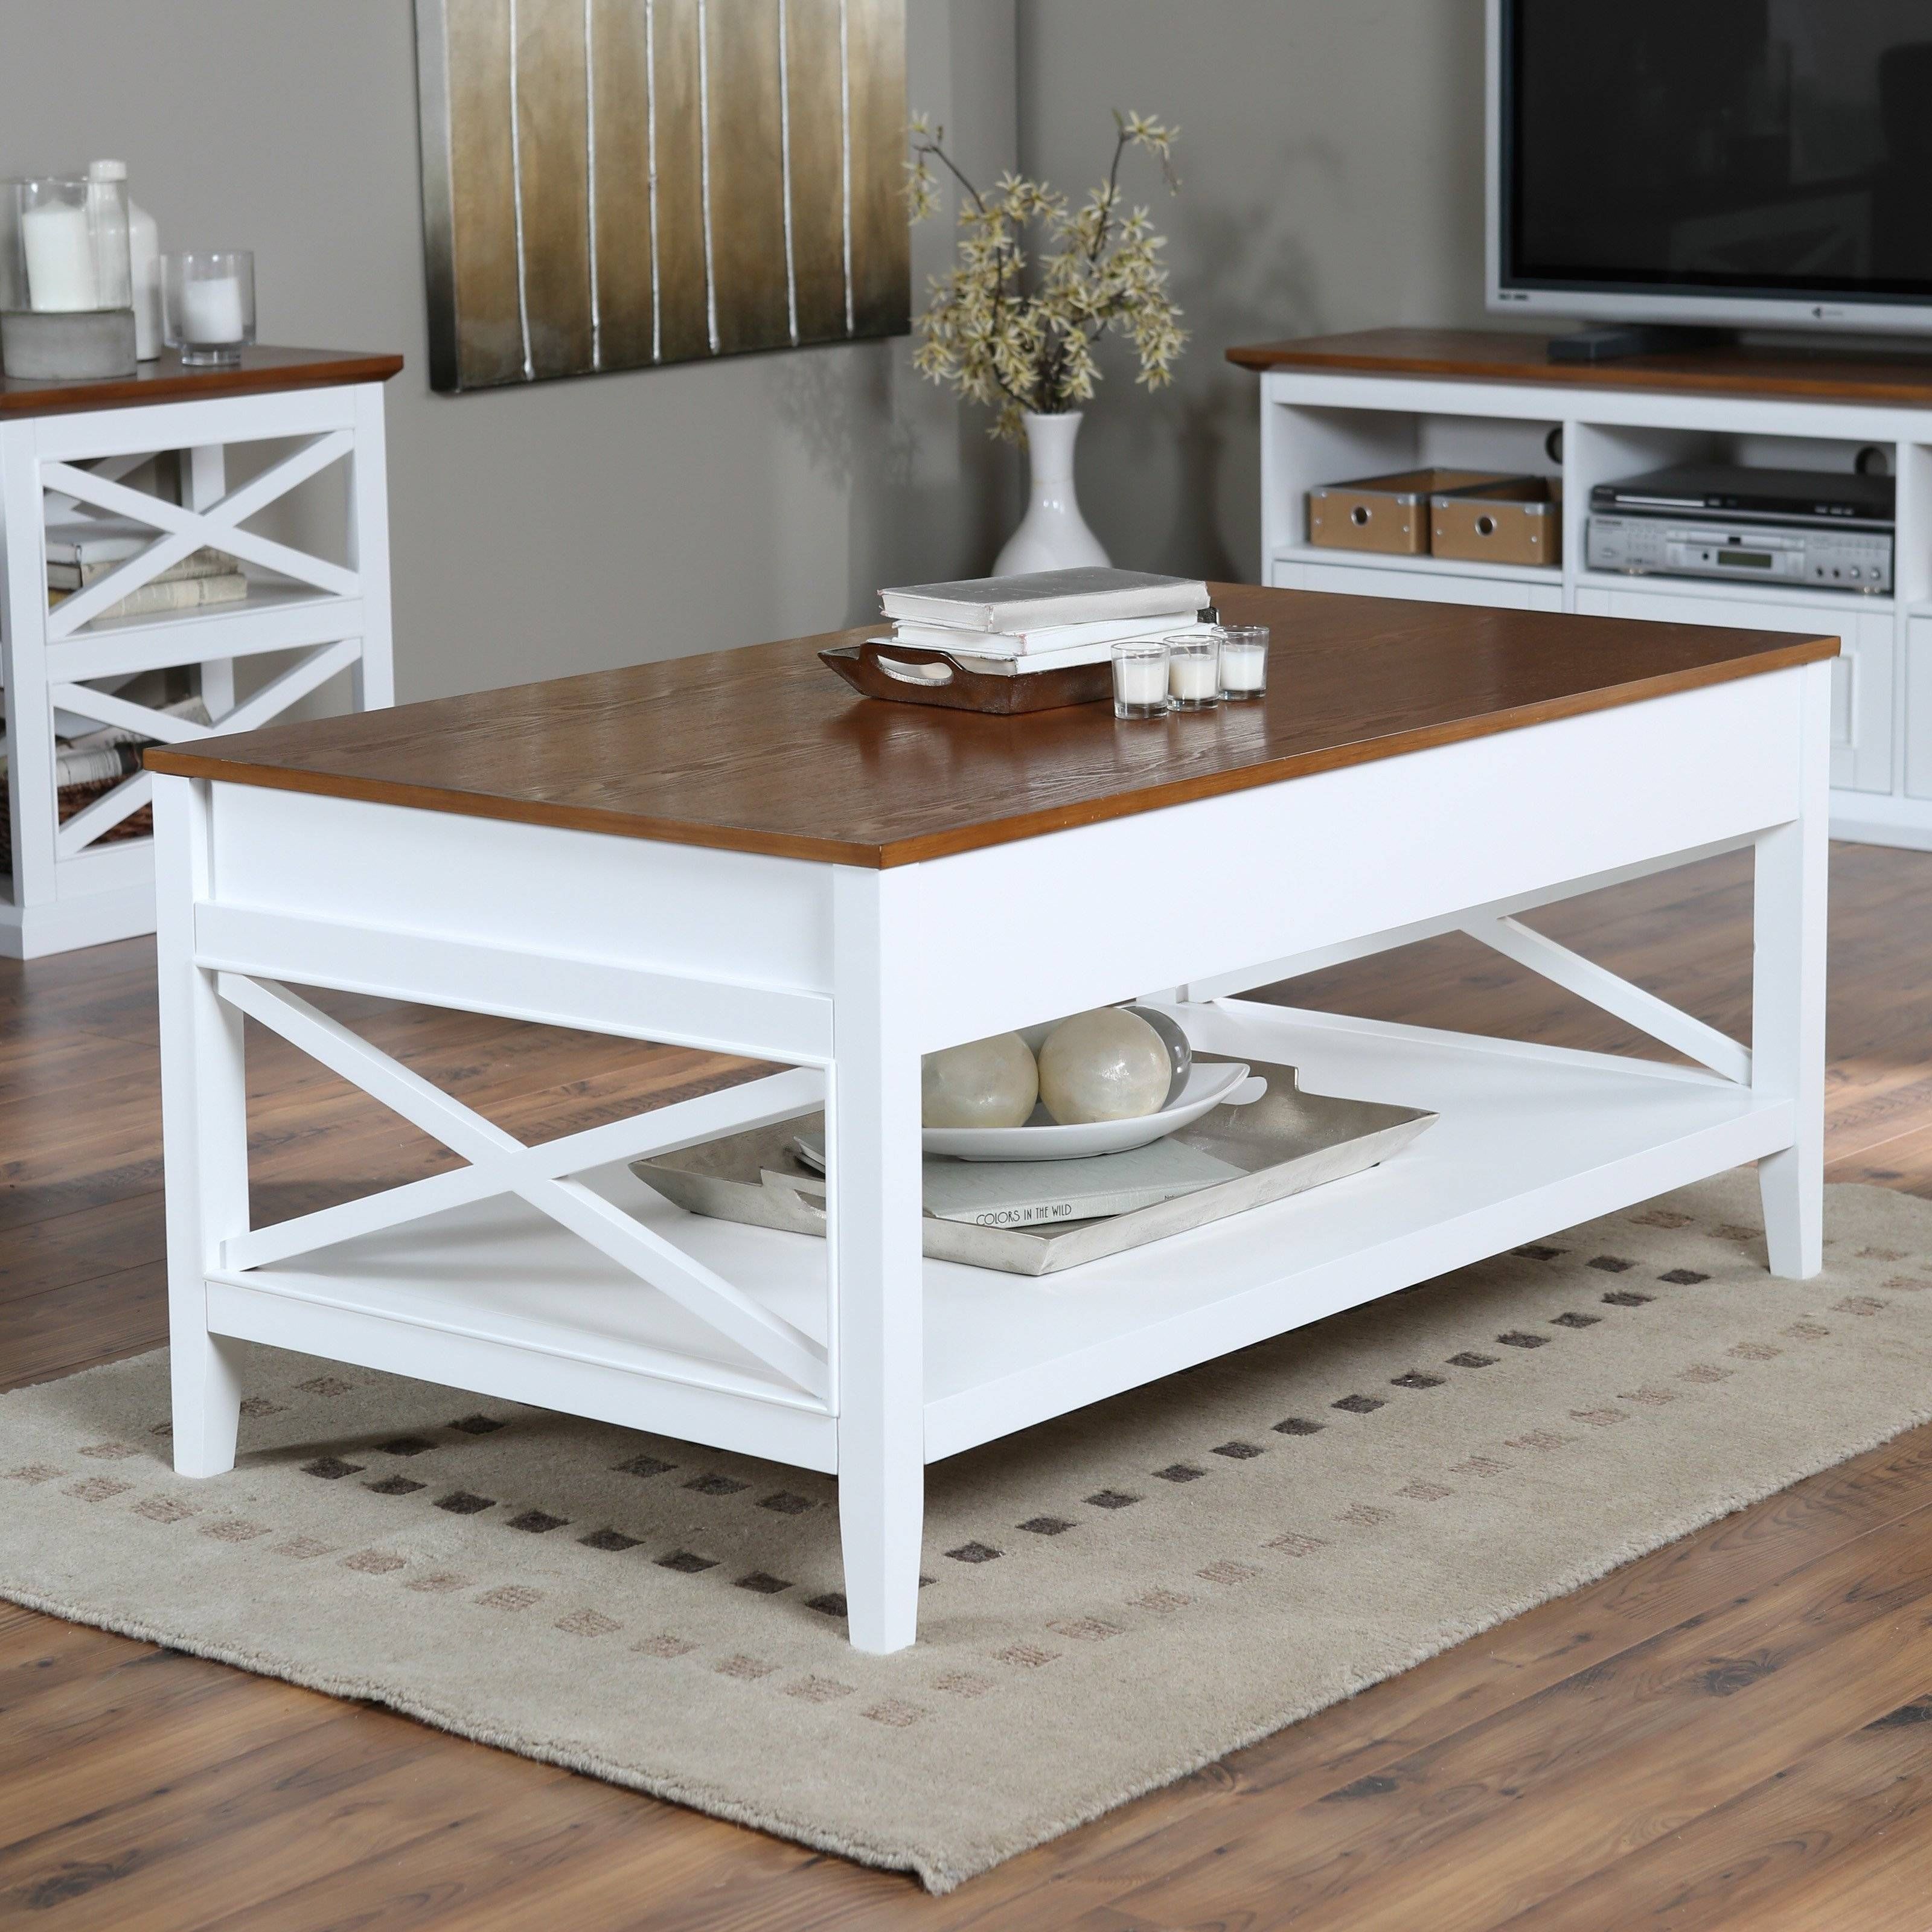 Belham Living Hampton Storage And Lift Top Coffee Table | Hayneedle For White And Oak Coffee Tables (View 1 of 30)